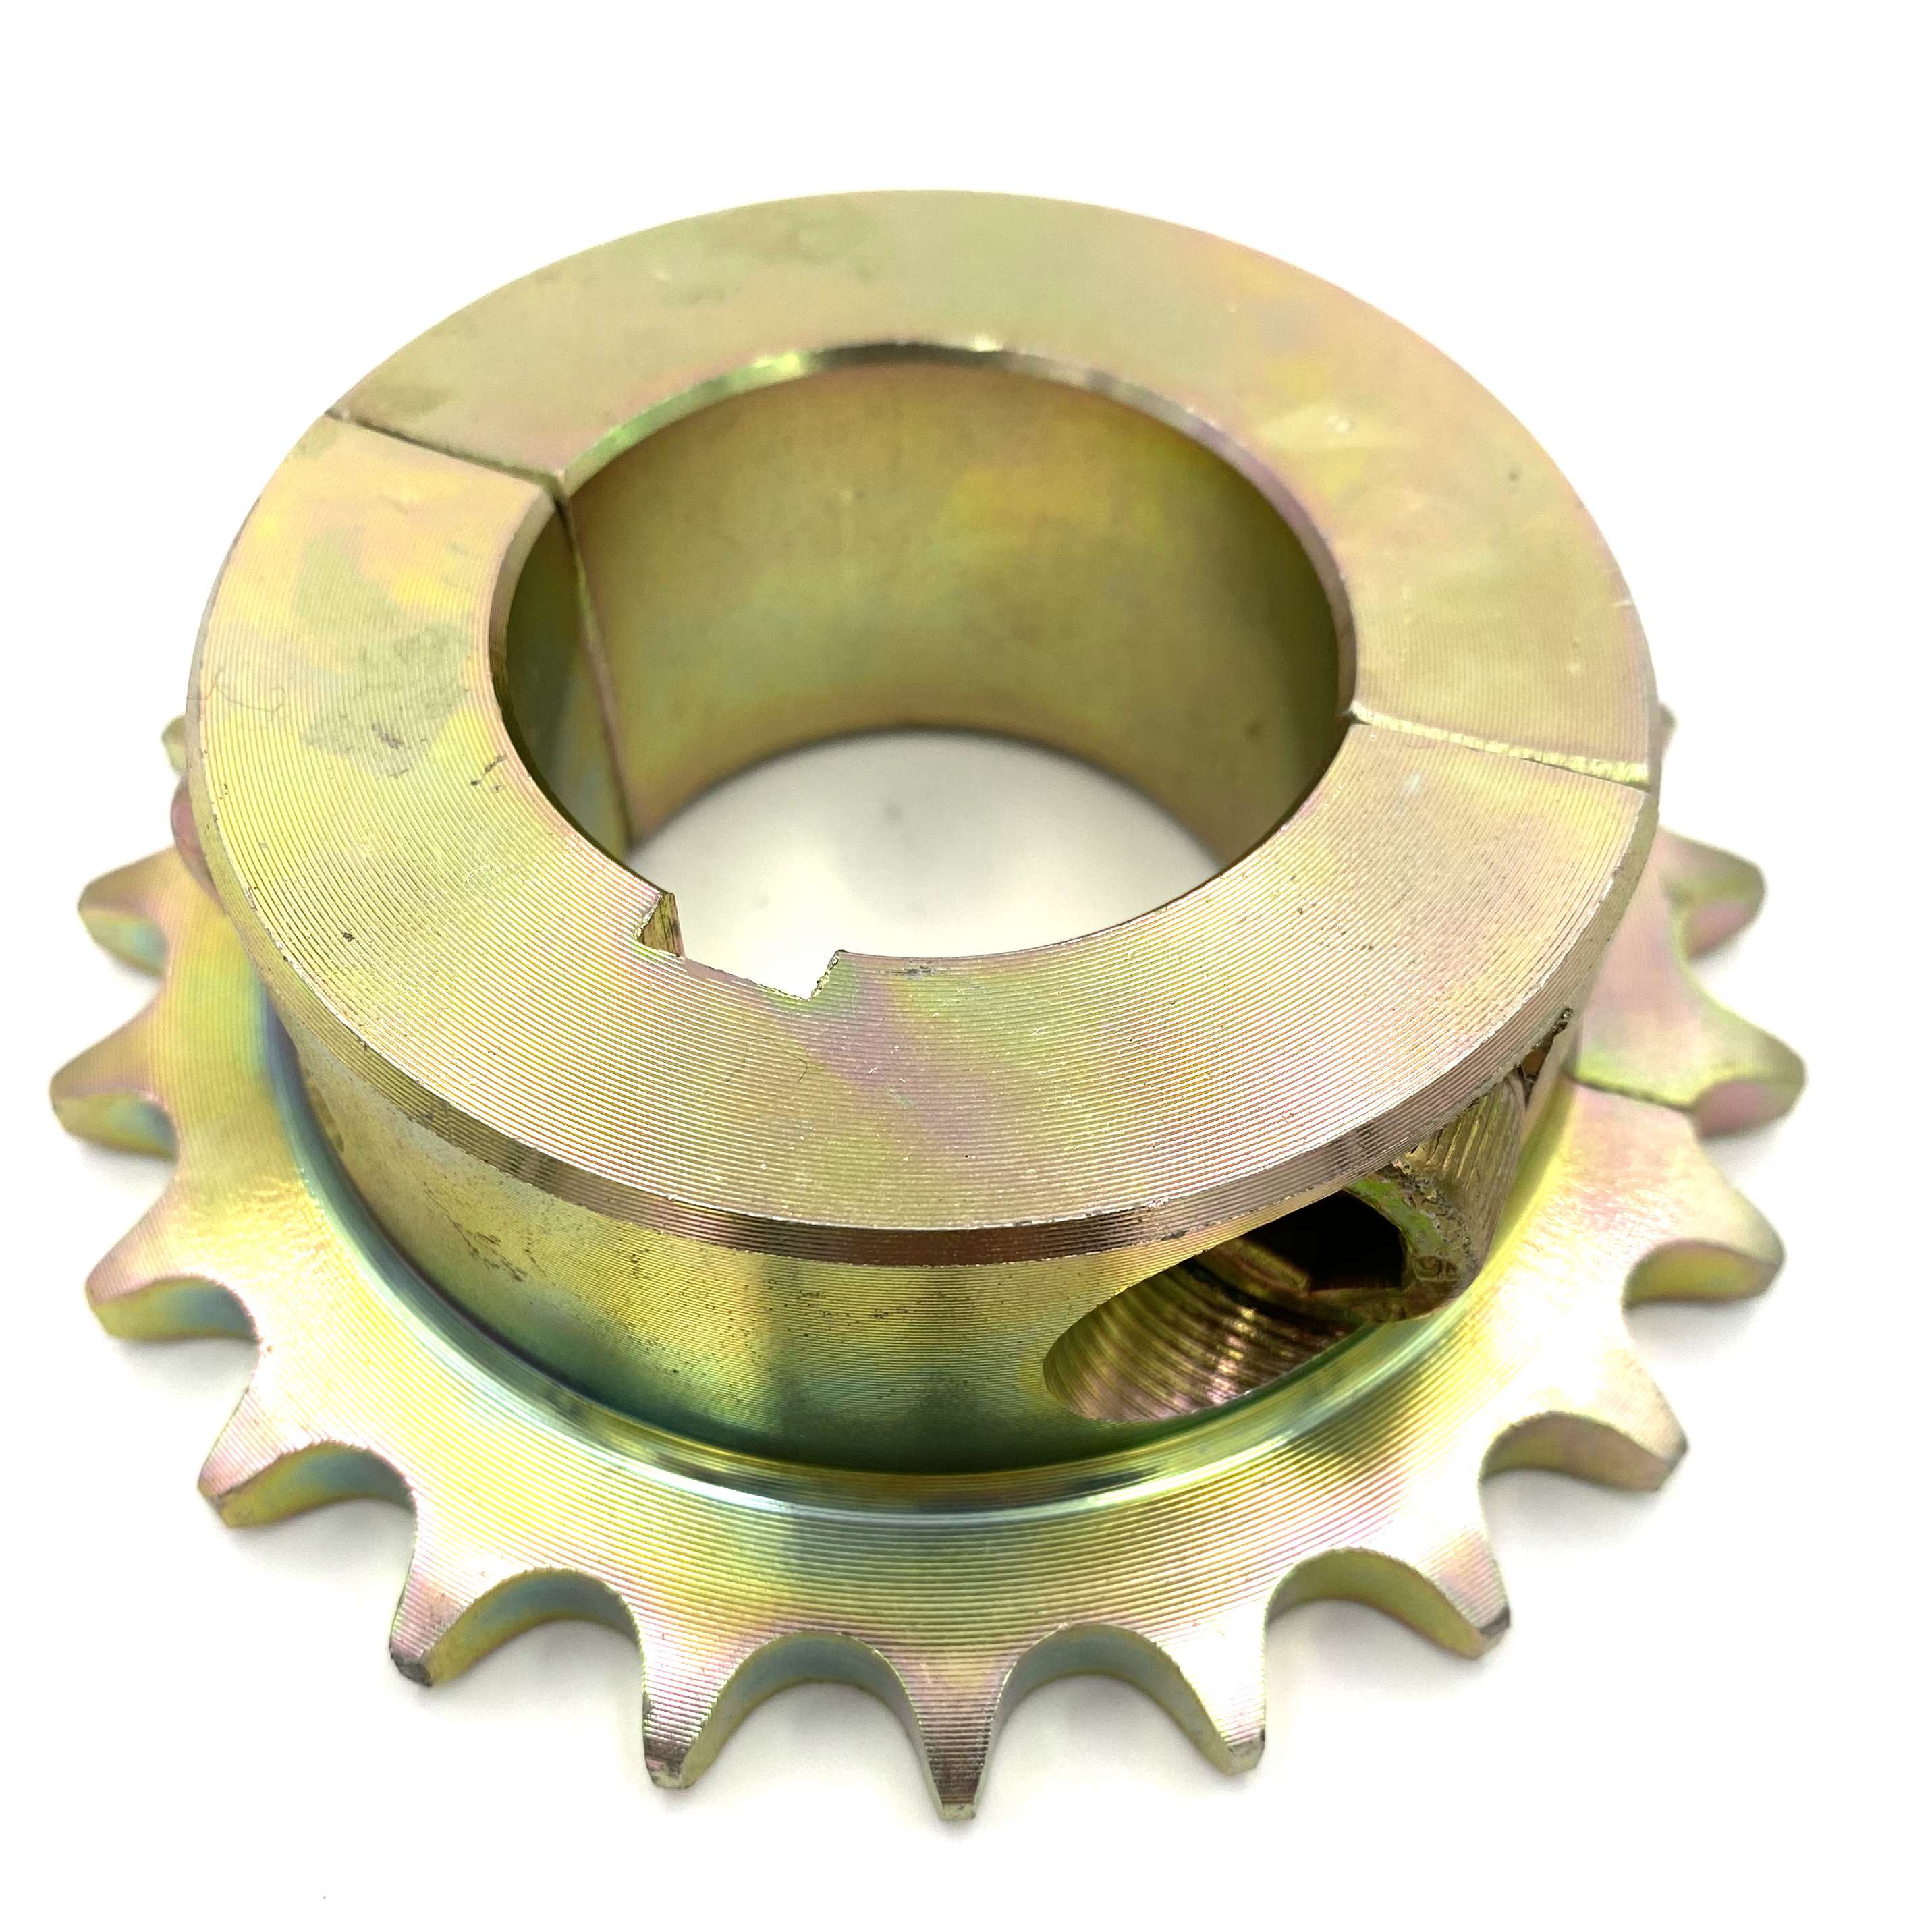 Best Kart Safety Buckle Exporters - 24T 40 Bore GO KART STEEL SPROCKET PITCH 428 – Tongbao